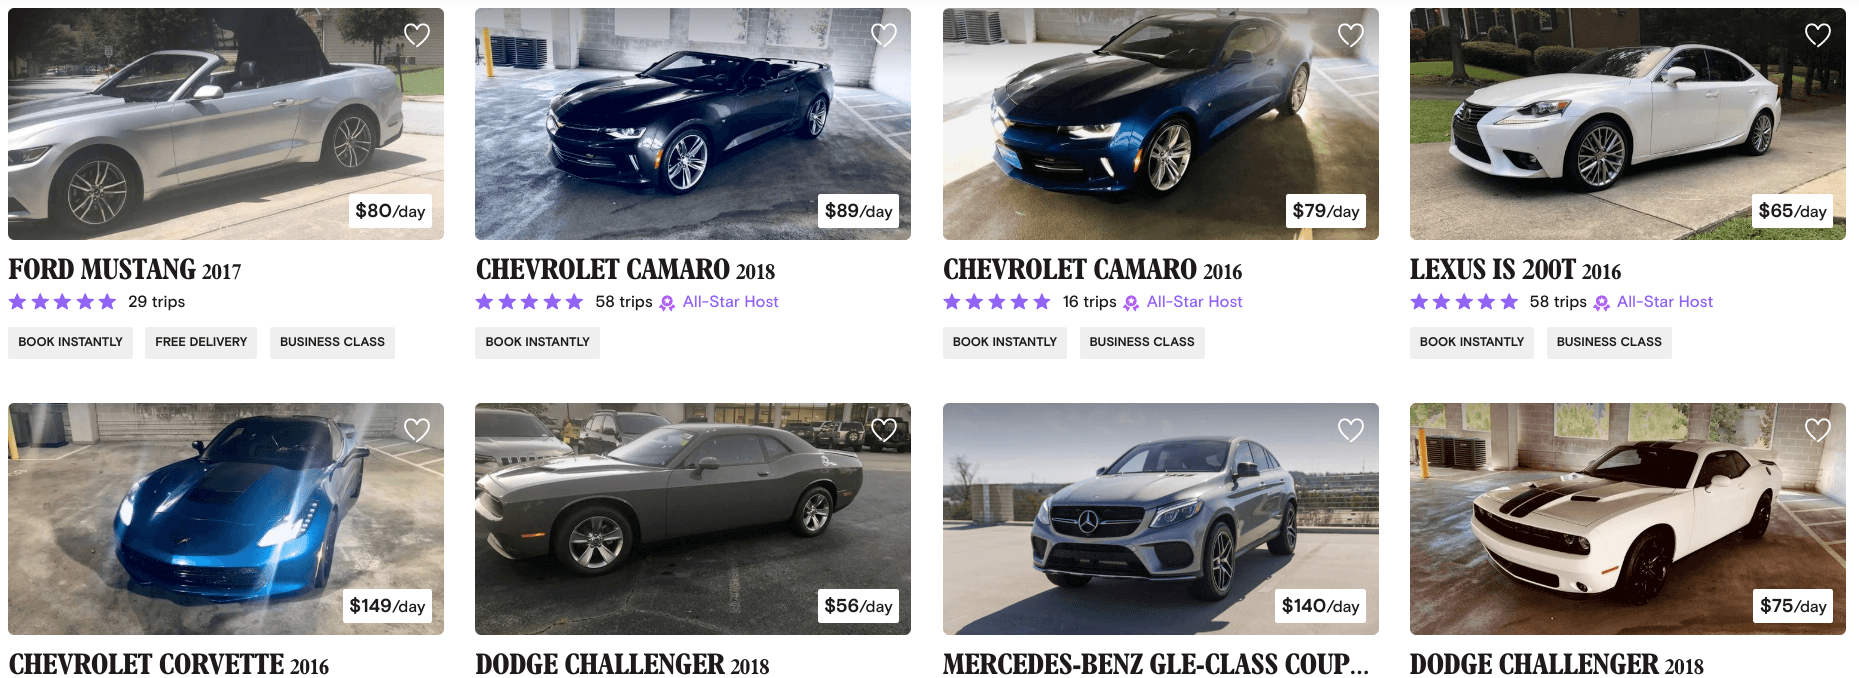 How To Start A Car Rental Business On Turo / Turo Ceases German P2p